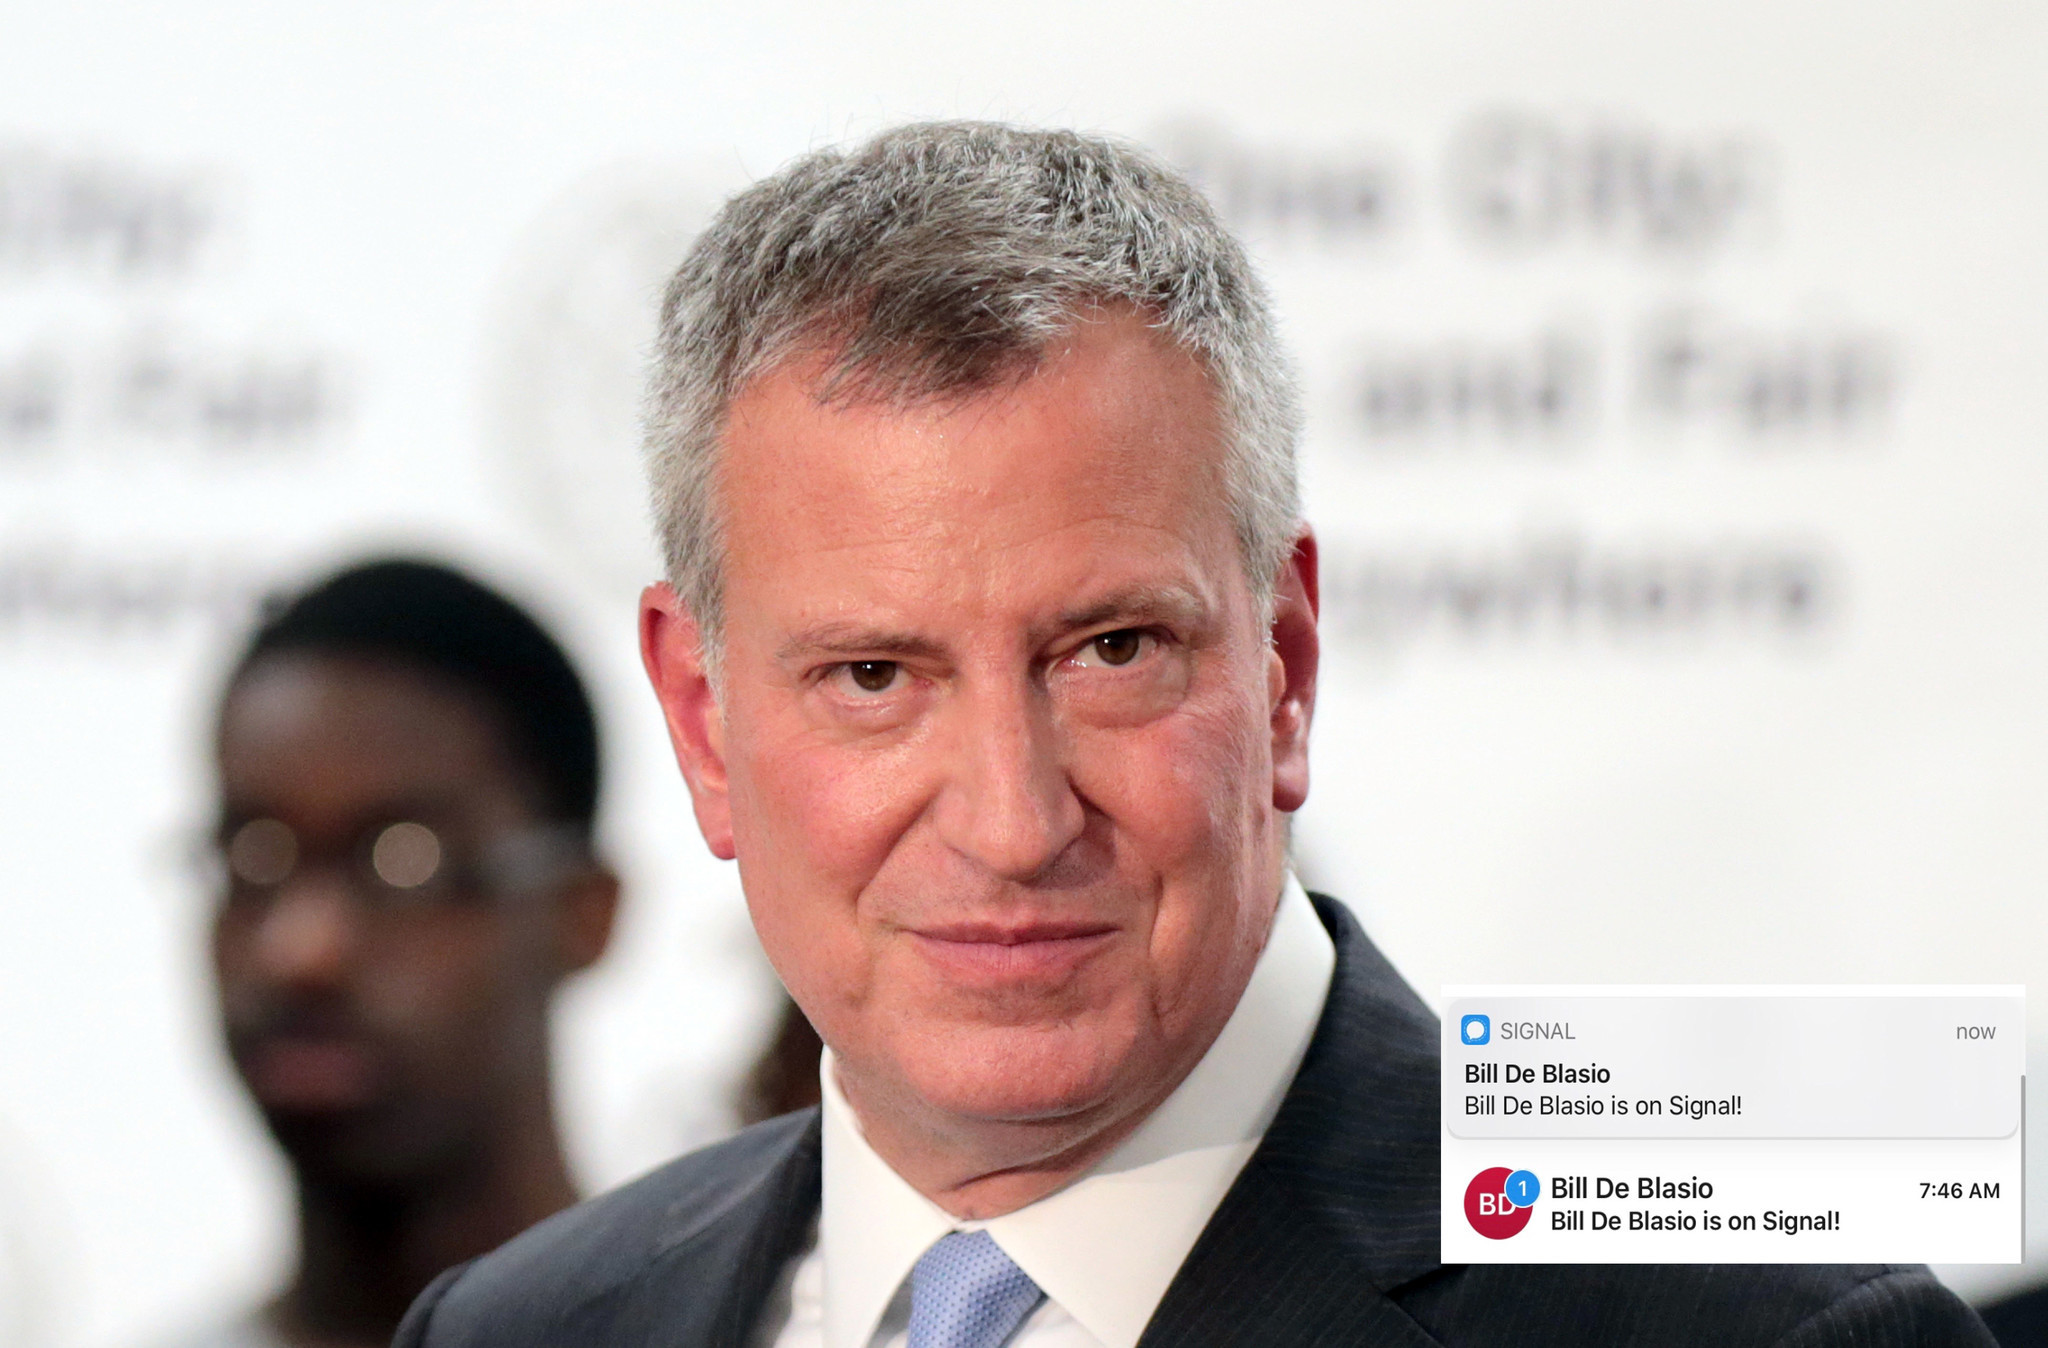 Mayor de Blasio joins encrypted messaging app Signal, raising legal and ethical questions